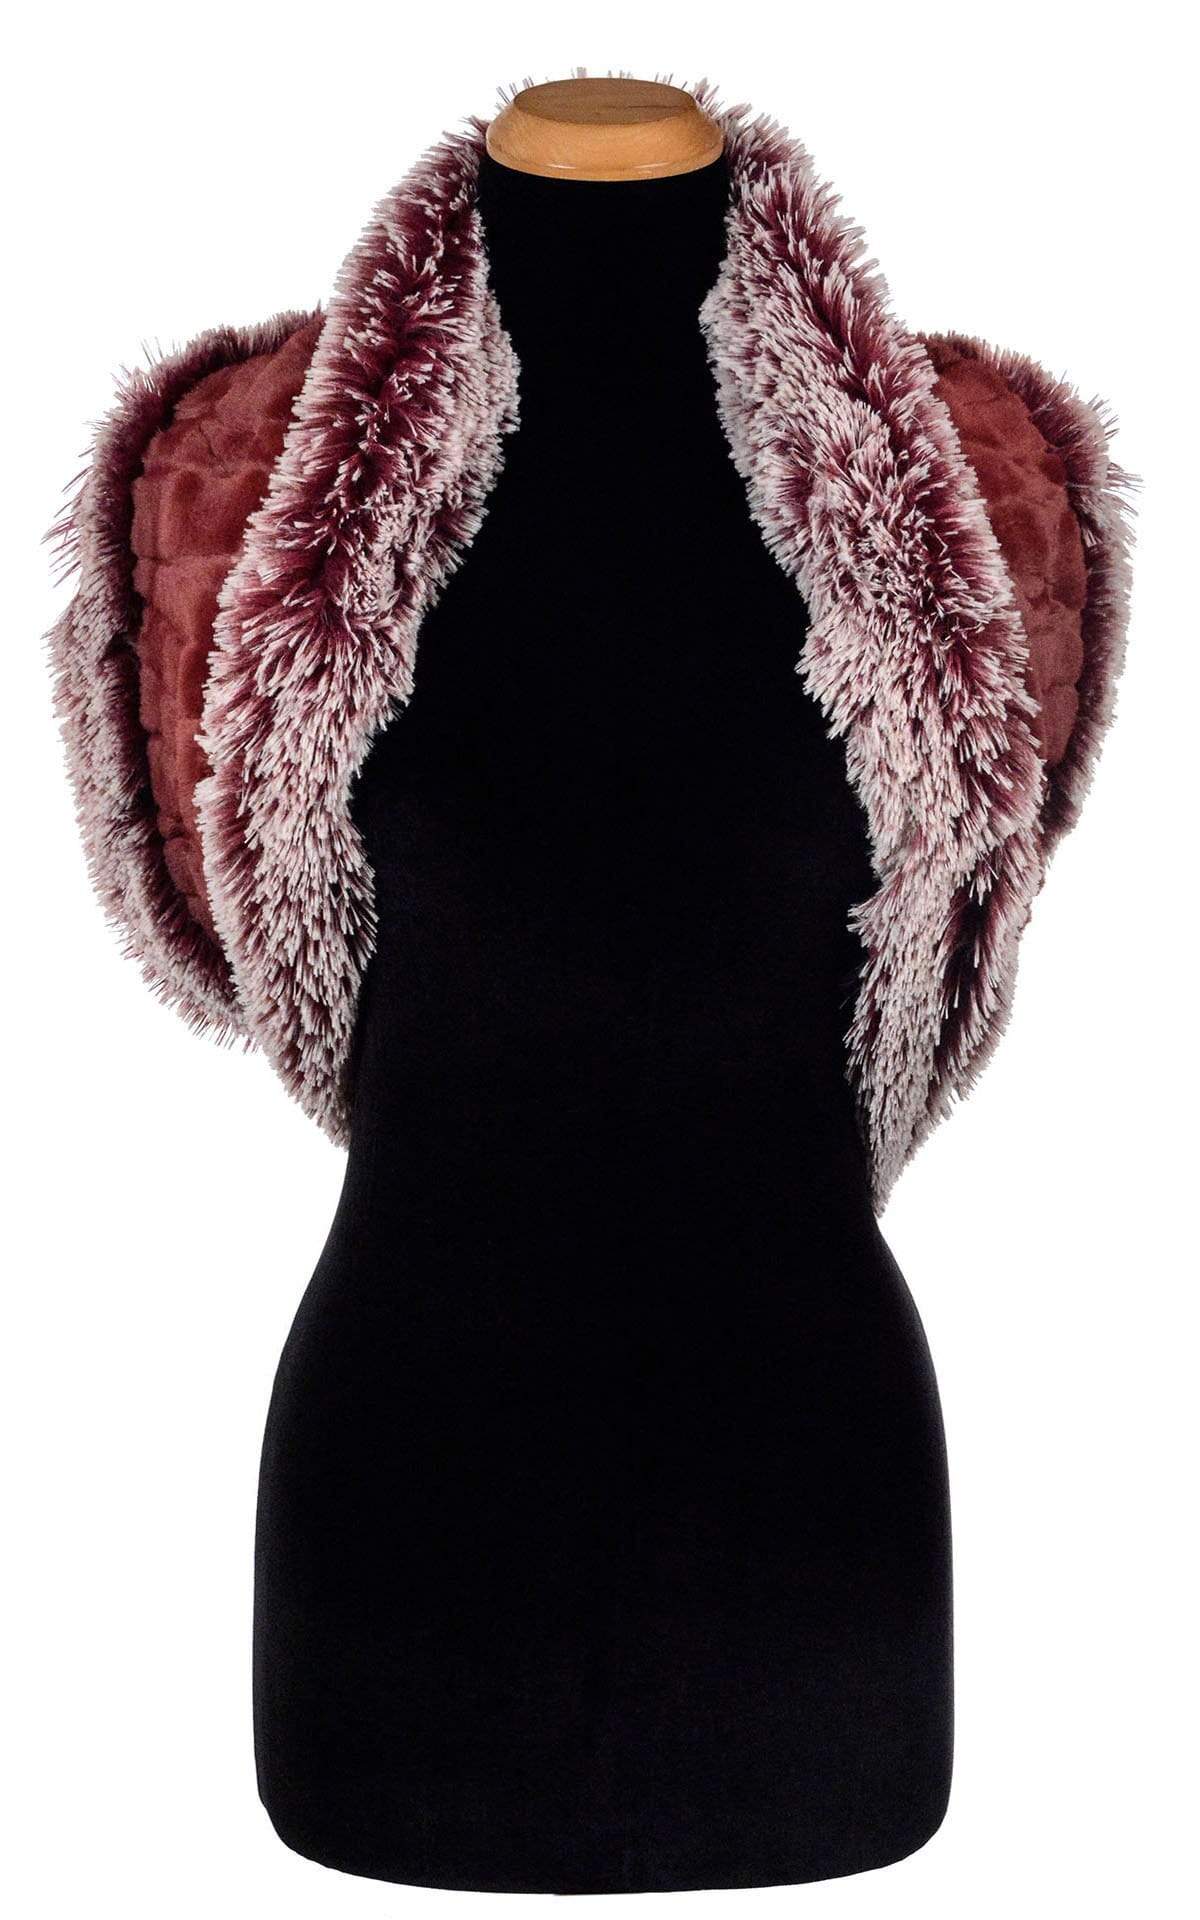 Shrug Style view Double Cowl Shrug looped behind on mannequin like a shrug | Cranberry Creek and Berry Foxy Faux Fur | Handmade USA by Pandemonium Seattle